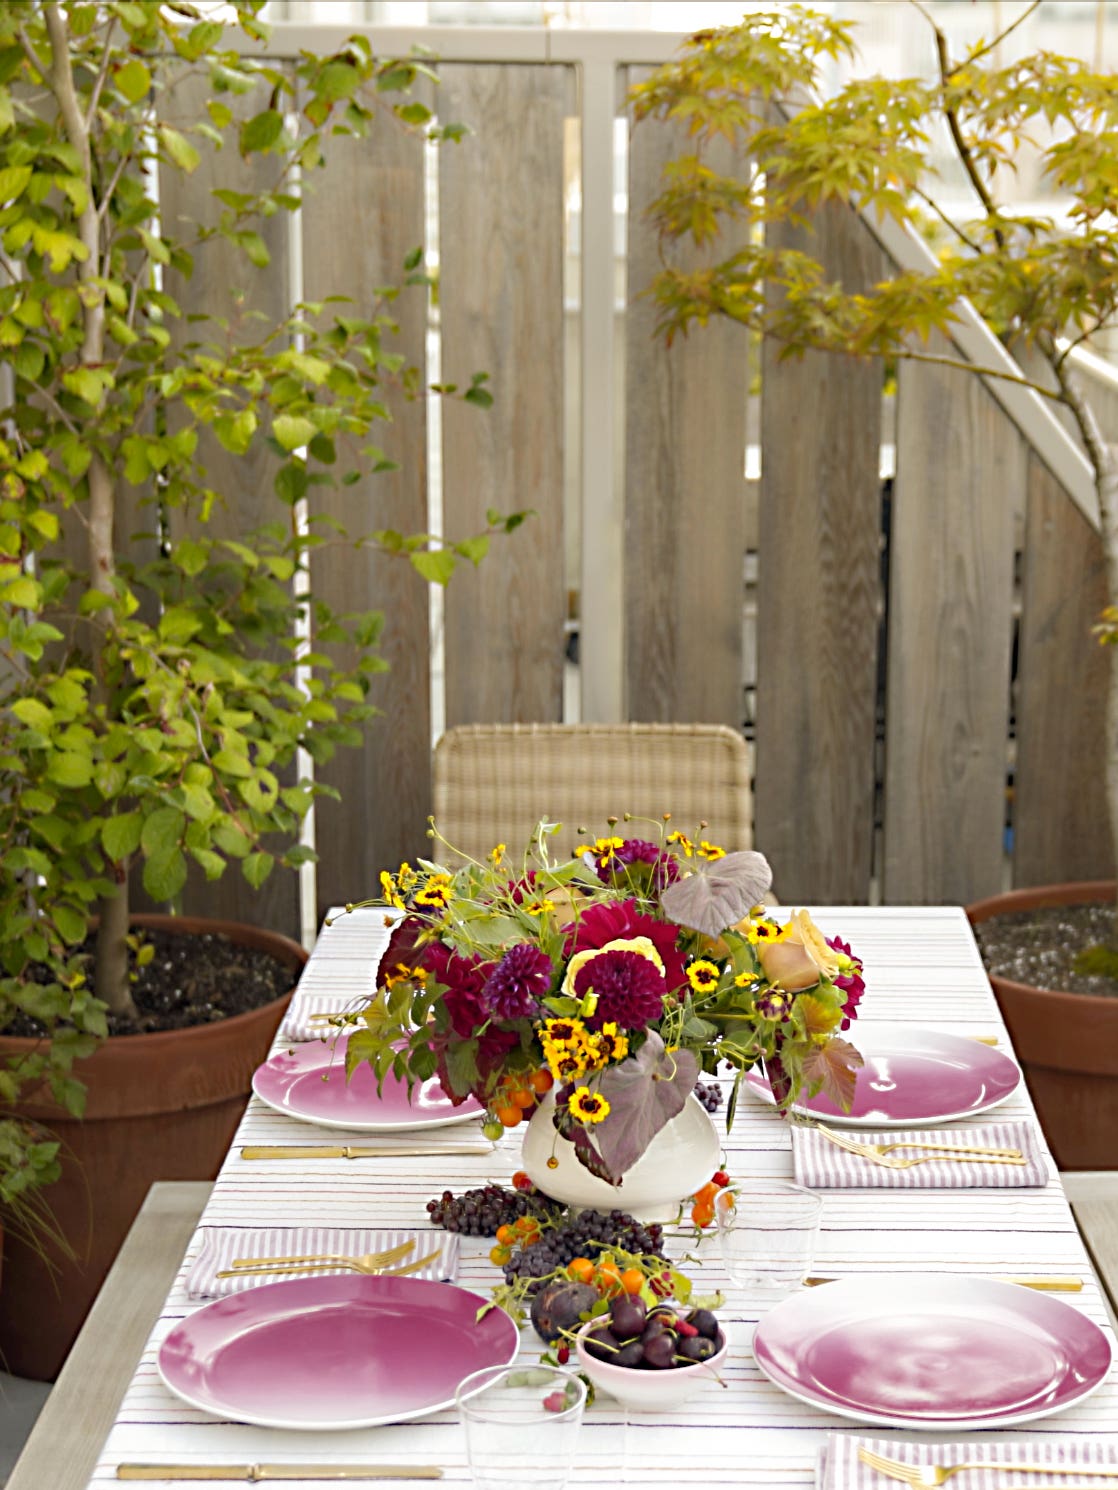 5 Ways To Dress Your Table for Fall